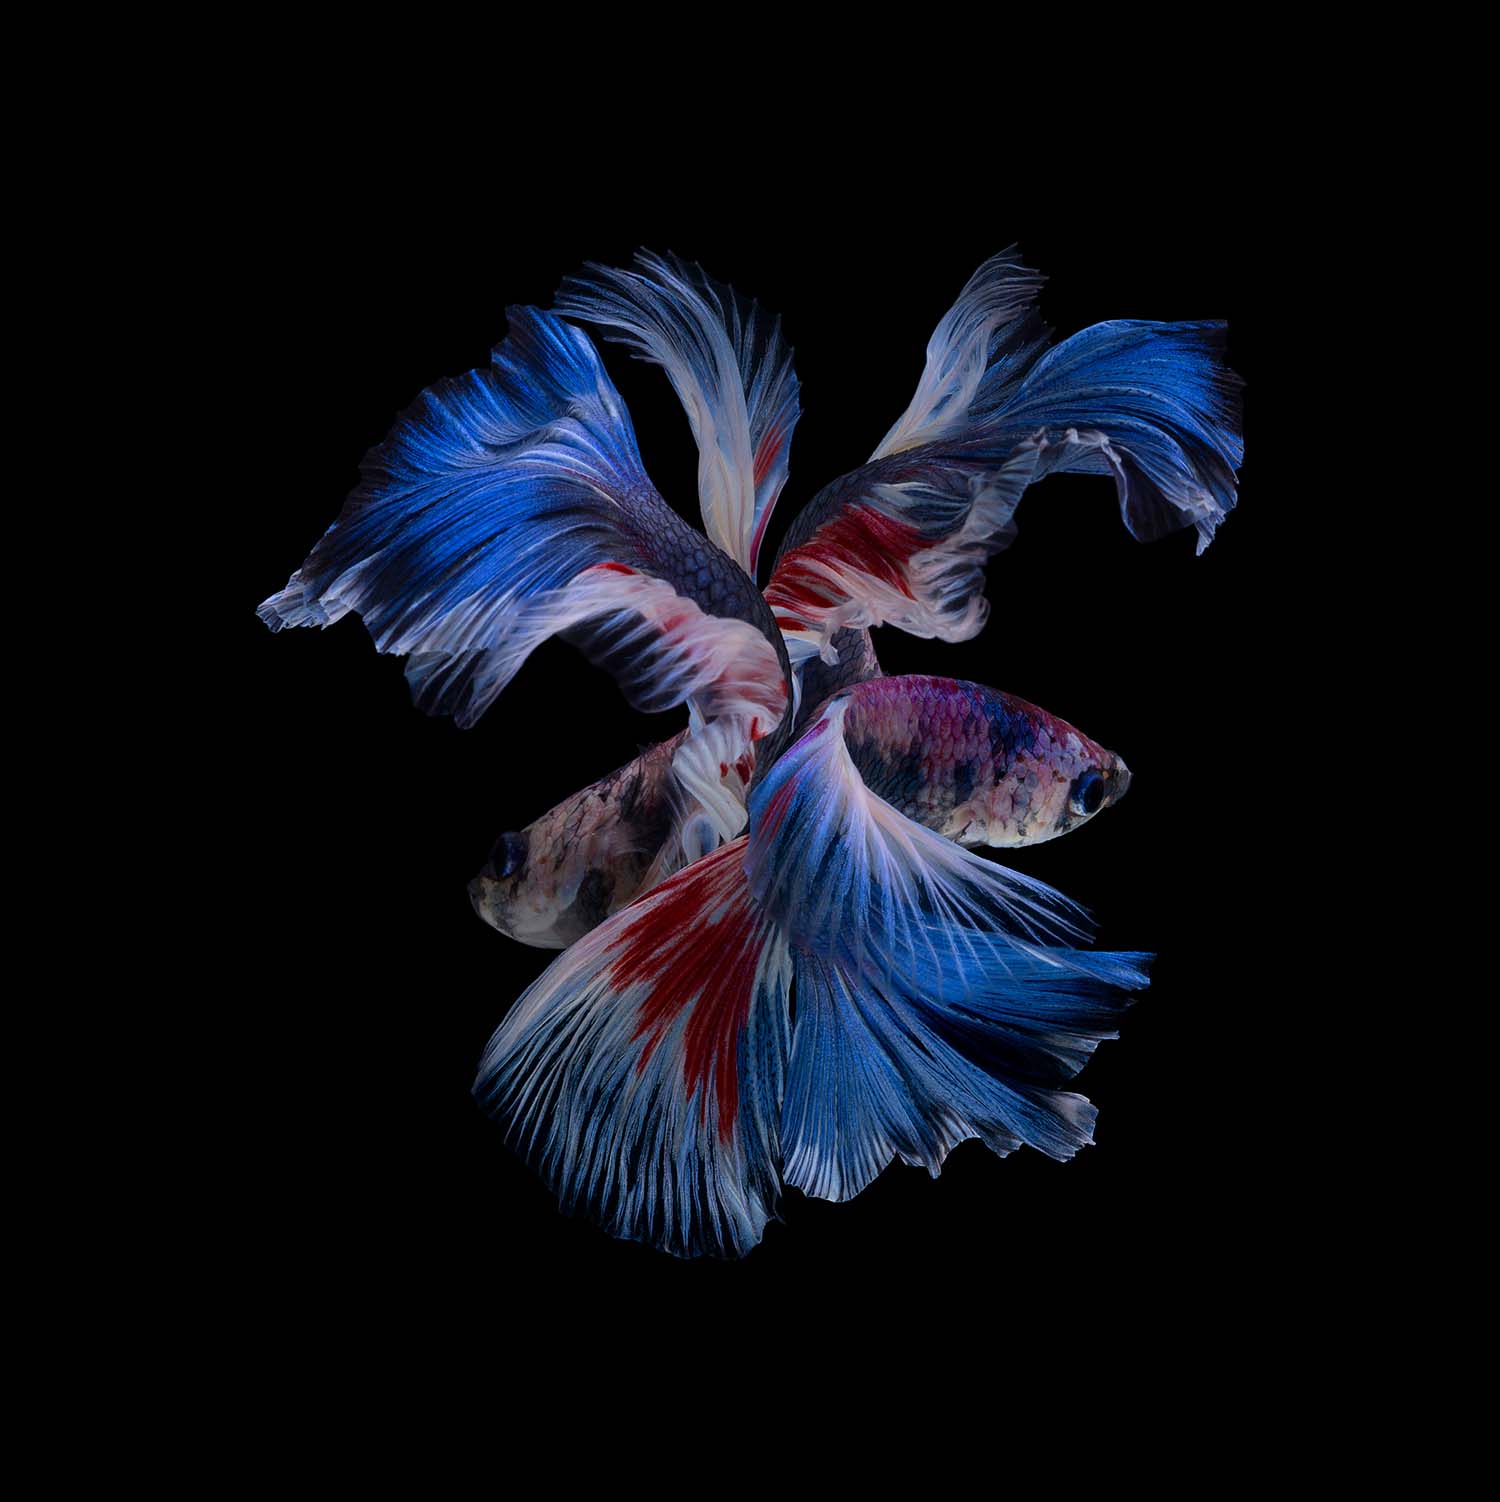 Top tips for photographing Mount Fuji and... Siamese fighting fish ...